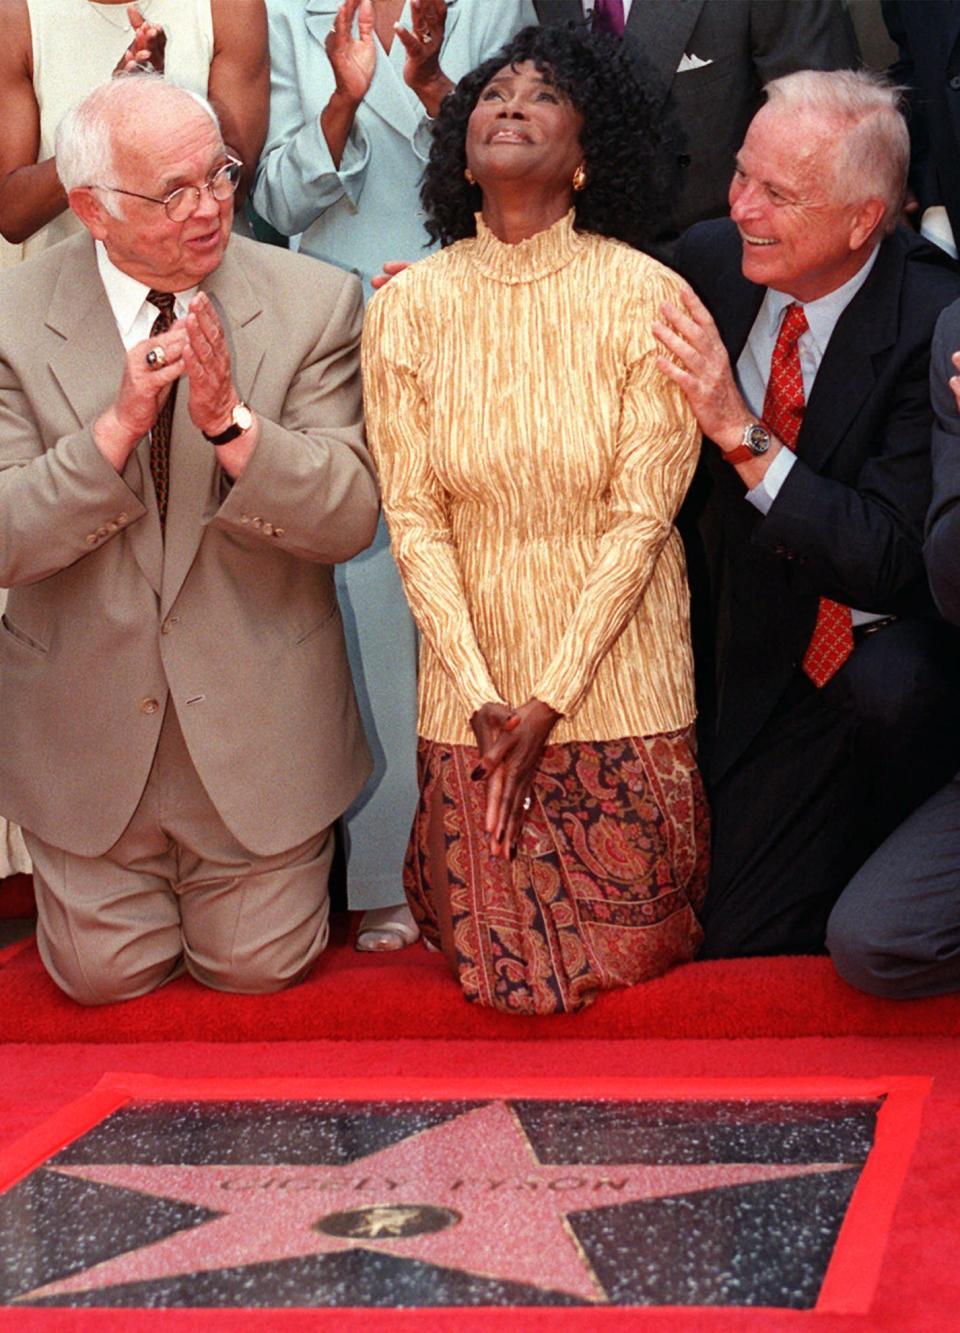 FILE - Academy Award-nominated actress Cicely Tyson reacts to the unveiling of her star on the Hollywood Walk of Fame in the Hollywood section of Los Angeles, Thursday, Aug. 21, 1997. Honorary Mayor of Hollywood and chairman of the Walk of Fame committee Johnny Grant, left, and Los Angeles Mayor Richard Riordan joined Tyson for the unveiling. Tyson, the pioneering Black actress who gained an Oscar nomination for her role as the sharecropper's wife in "Sounder," a Tony Award in 2013 at age 88 and touched TV viewers' hearts in "The Autobiography of Miss Jane Pittman," has died. She was 96. Tyson's death was announced by her family, via her manager Larry Thompson, who did not immediately provide additional details. (AP Photo/Damian Dovarganes, File)